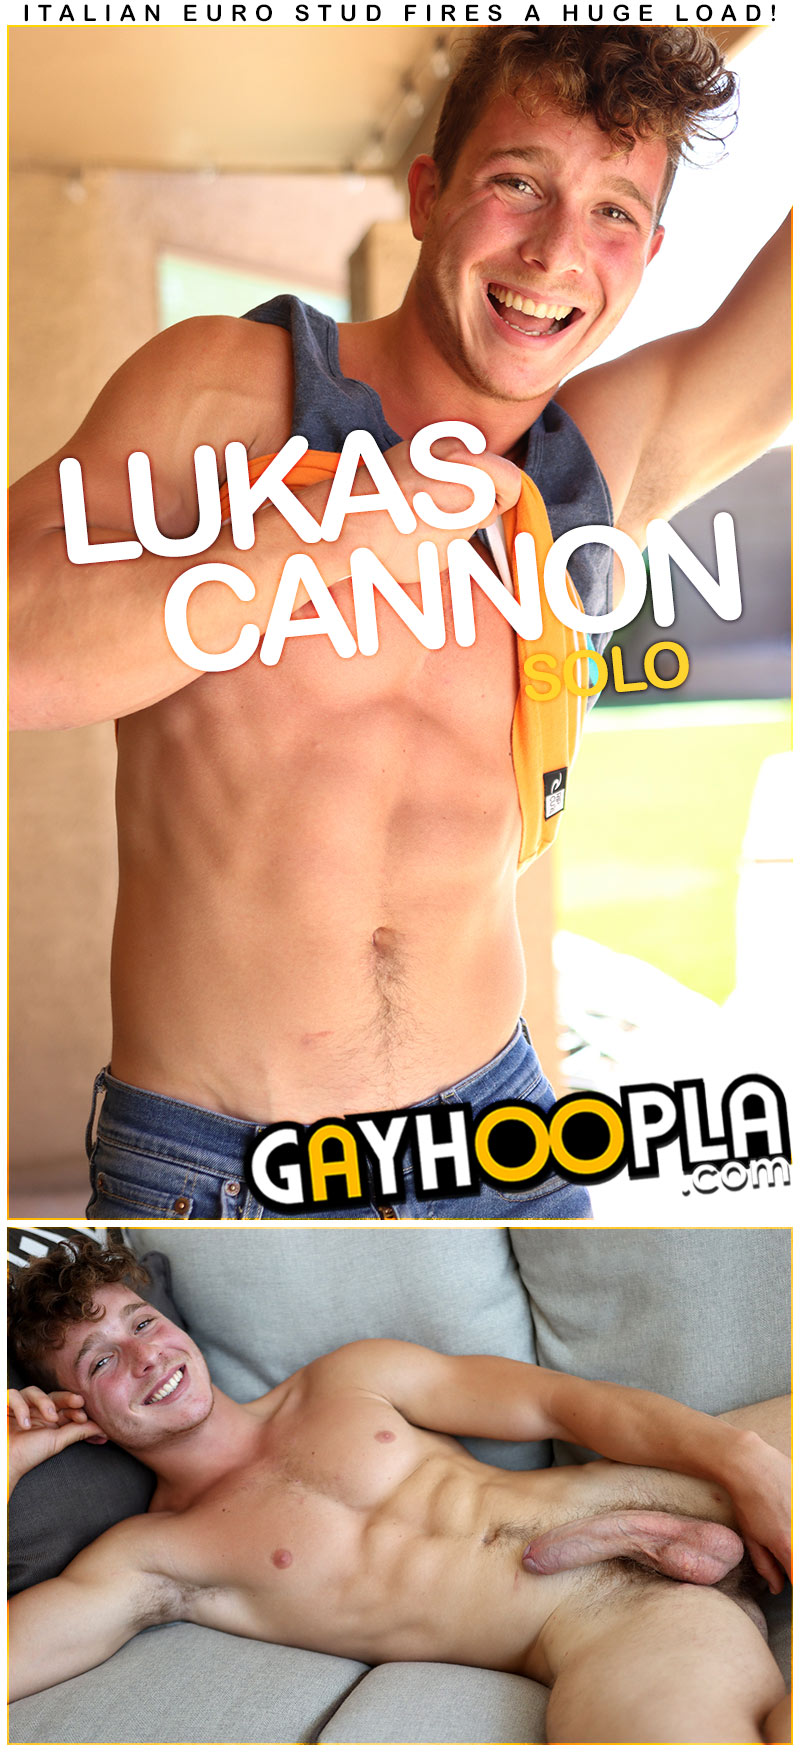 Lukas Cannon at GayHoopla